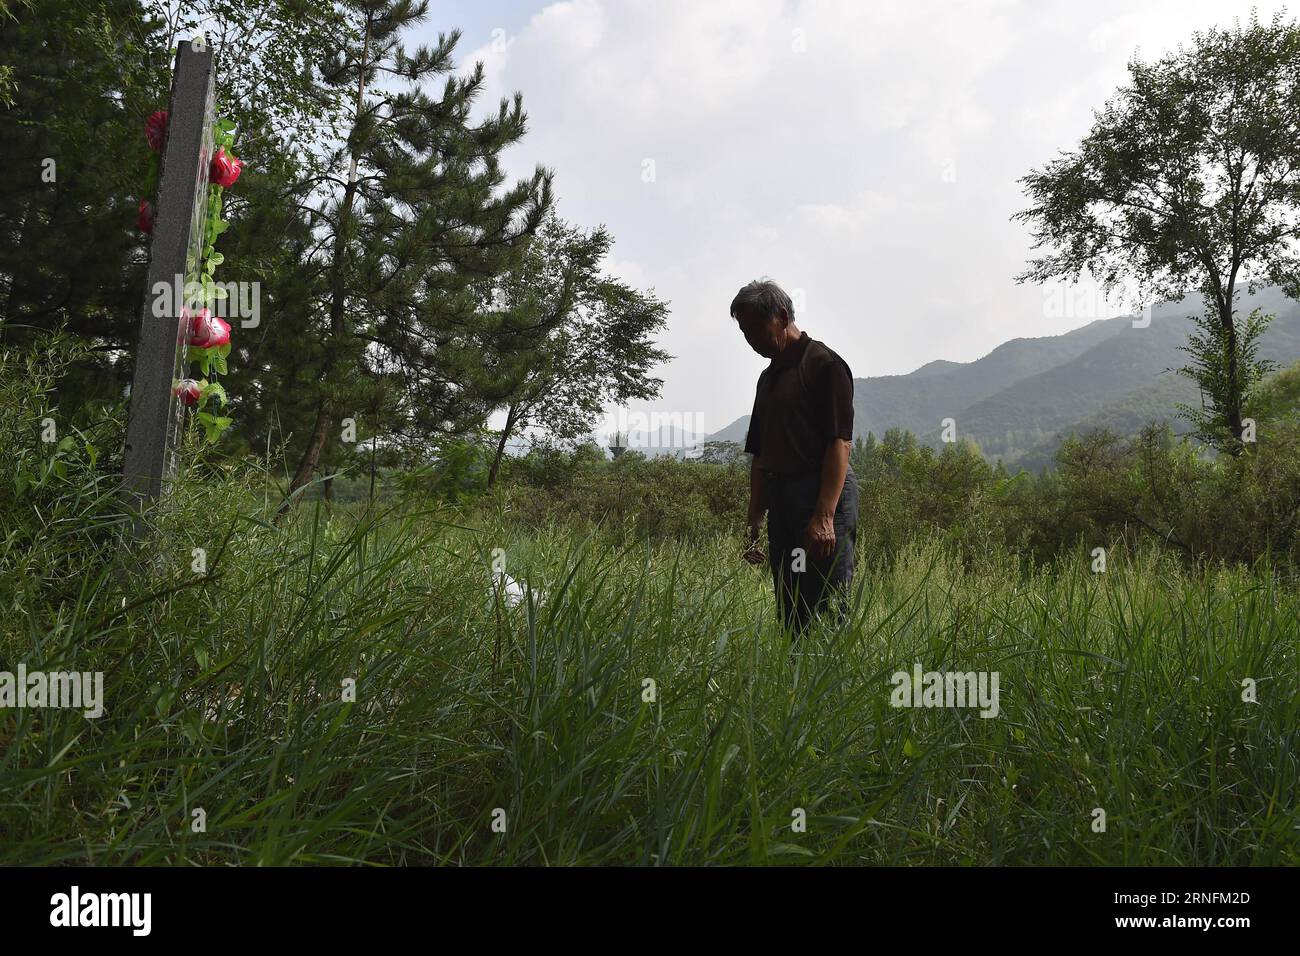 (160815) -- TAIYUAN, Aug. 15, 2016 -- Zhang Shuangbing, a village teacher who volunteered to investigate about the suffering and life of surviving comfort women in China for 34 years, stands before a grave of deceased woman Wan Aihua who was forced to serve as a comfort woman during the Second World War, in north China s Shanxi Province, Aug. 5, 2016. Monday marked the 71st anniversary of Japan s unconditional surrender at the end of World War II. Some 400,000 women in Asian were made into comfort women for the Japanese army during WWII, nearly half of which are Chinese, according to a researc Stock Photo